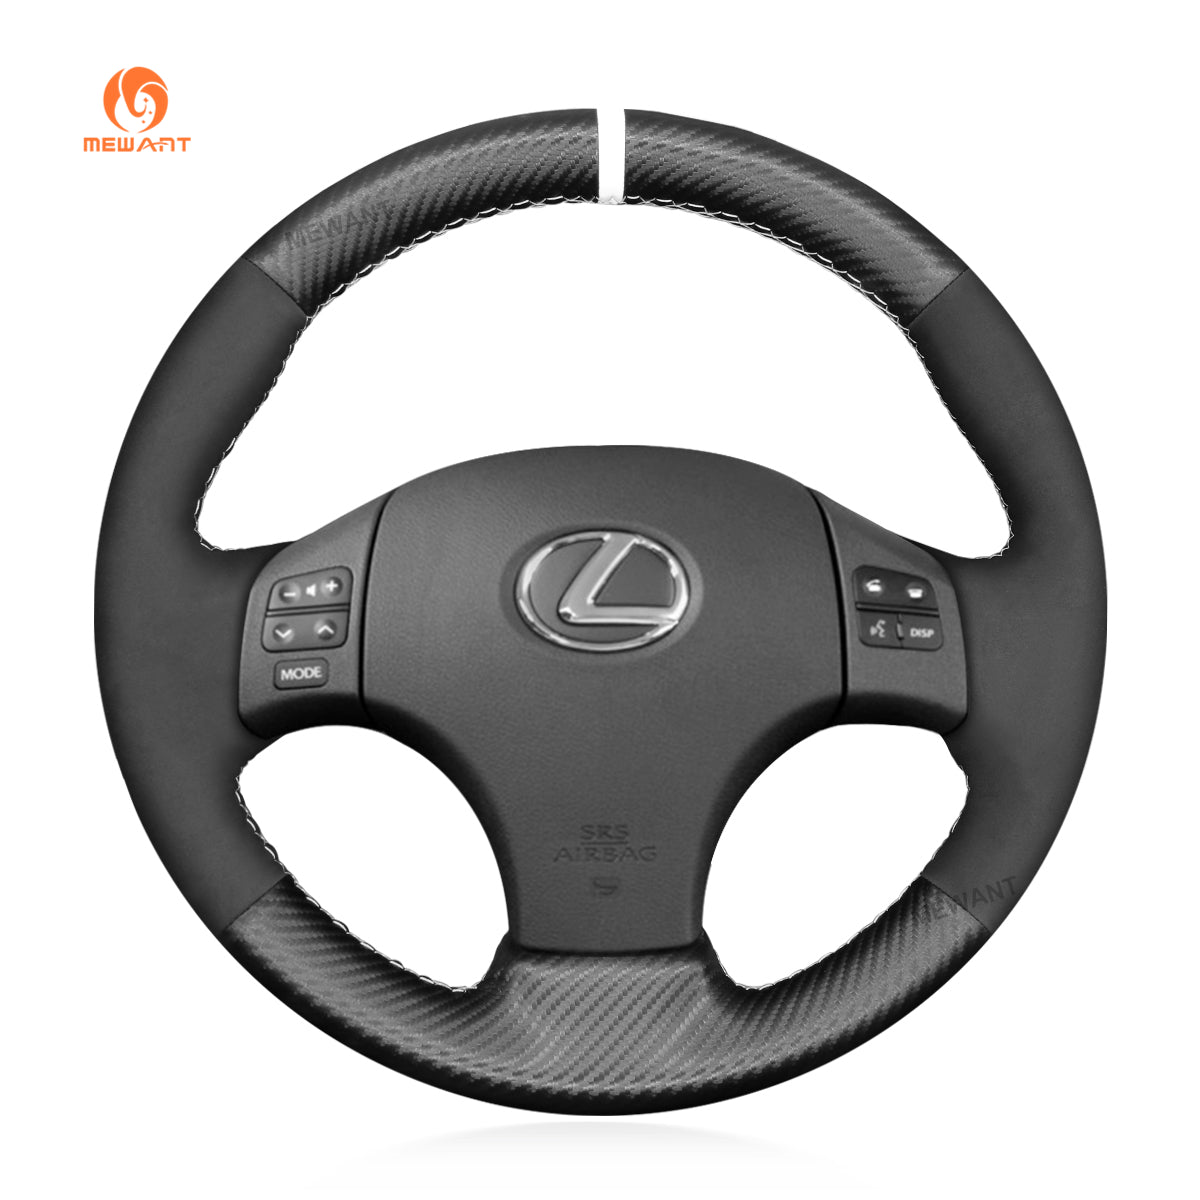 MEWANT DIY Suede Leather Carbon Fiber Car Steering Wheel Cover for Lexus IS 250 250C 350 350C IS F Sport 2006-2013